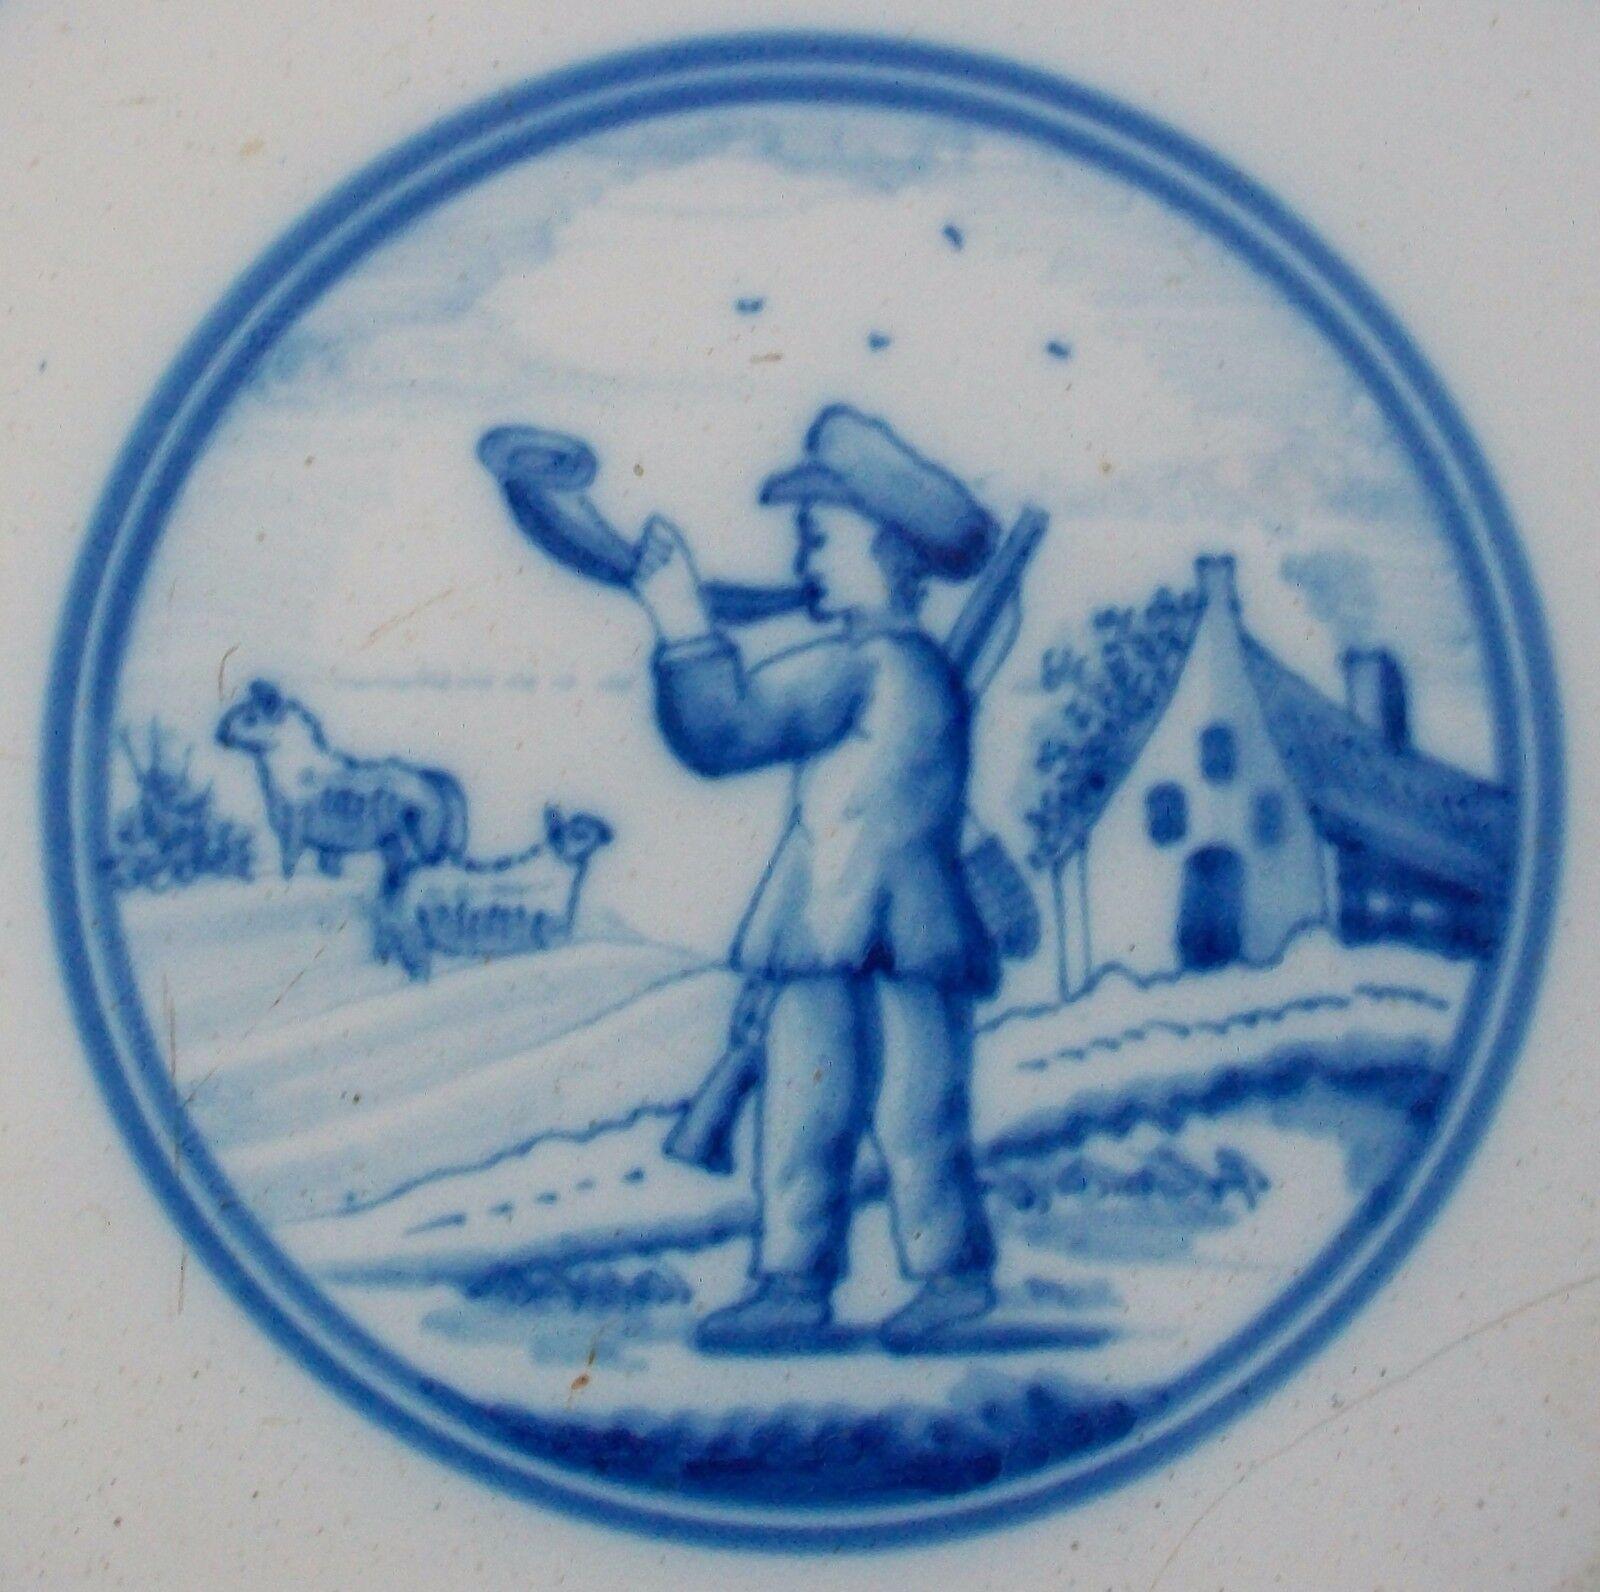 Rare antique Dutch Delft ceramic tile - hand painted featuring a shepherd and sheep in a pastoral setting within a round cartouche - 'spiderweb' pattern to the corners - unsigned - Holland - 18th century.

Fair antique condition - loss - damage